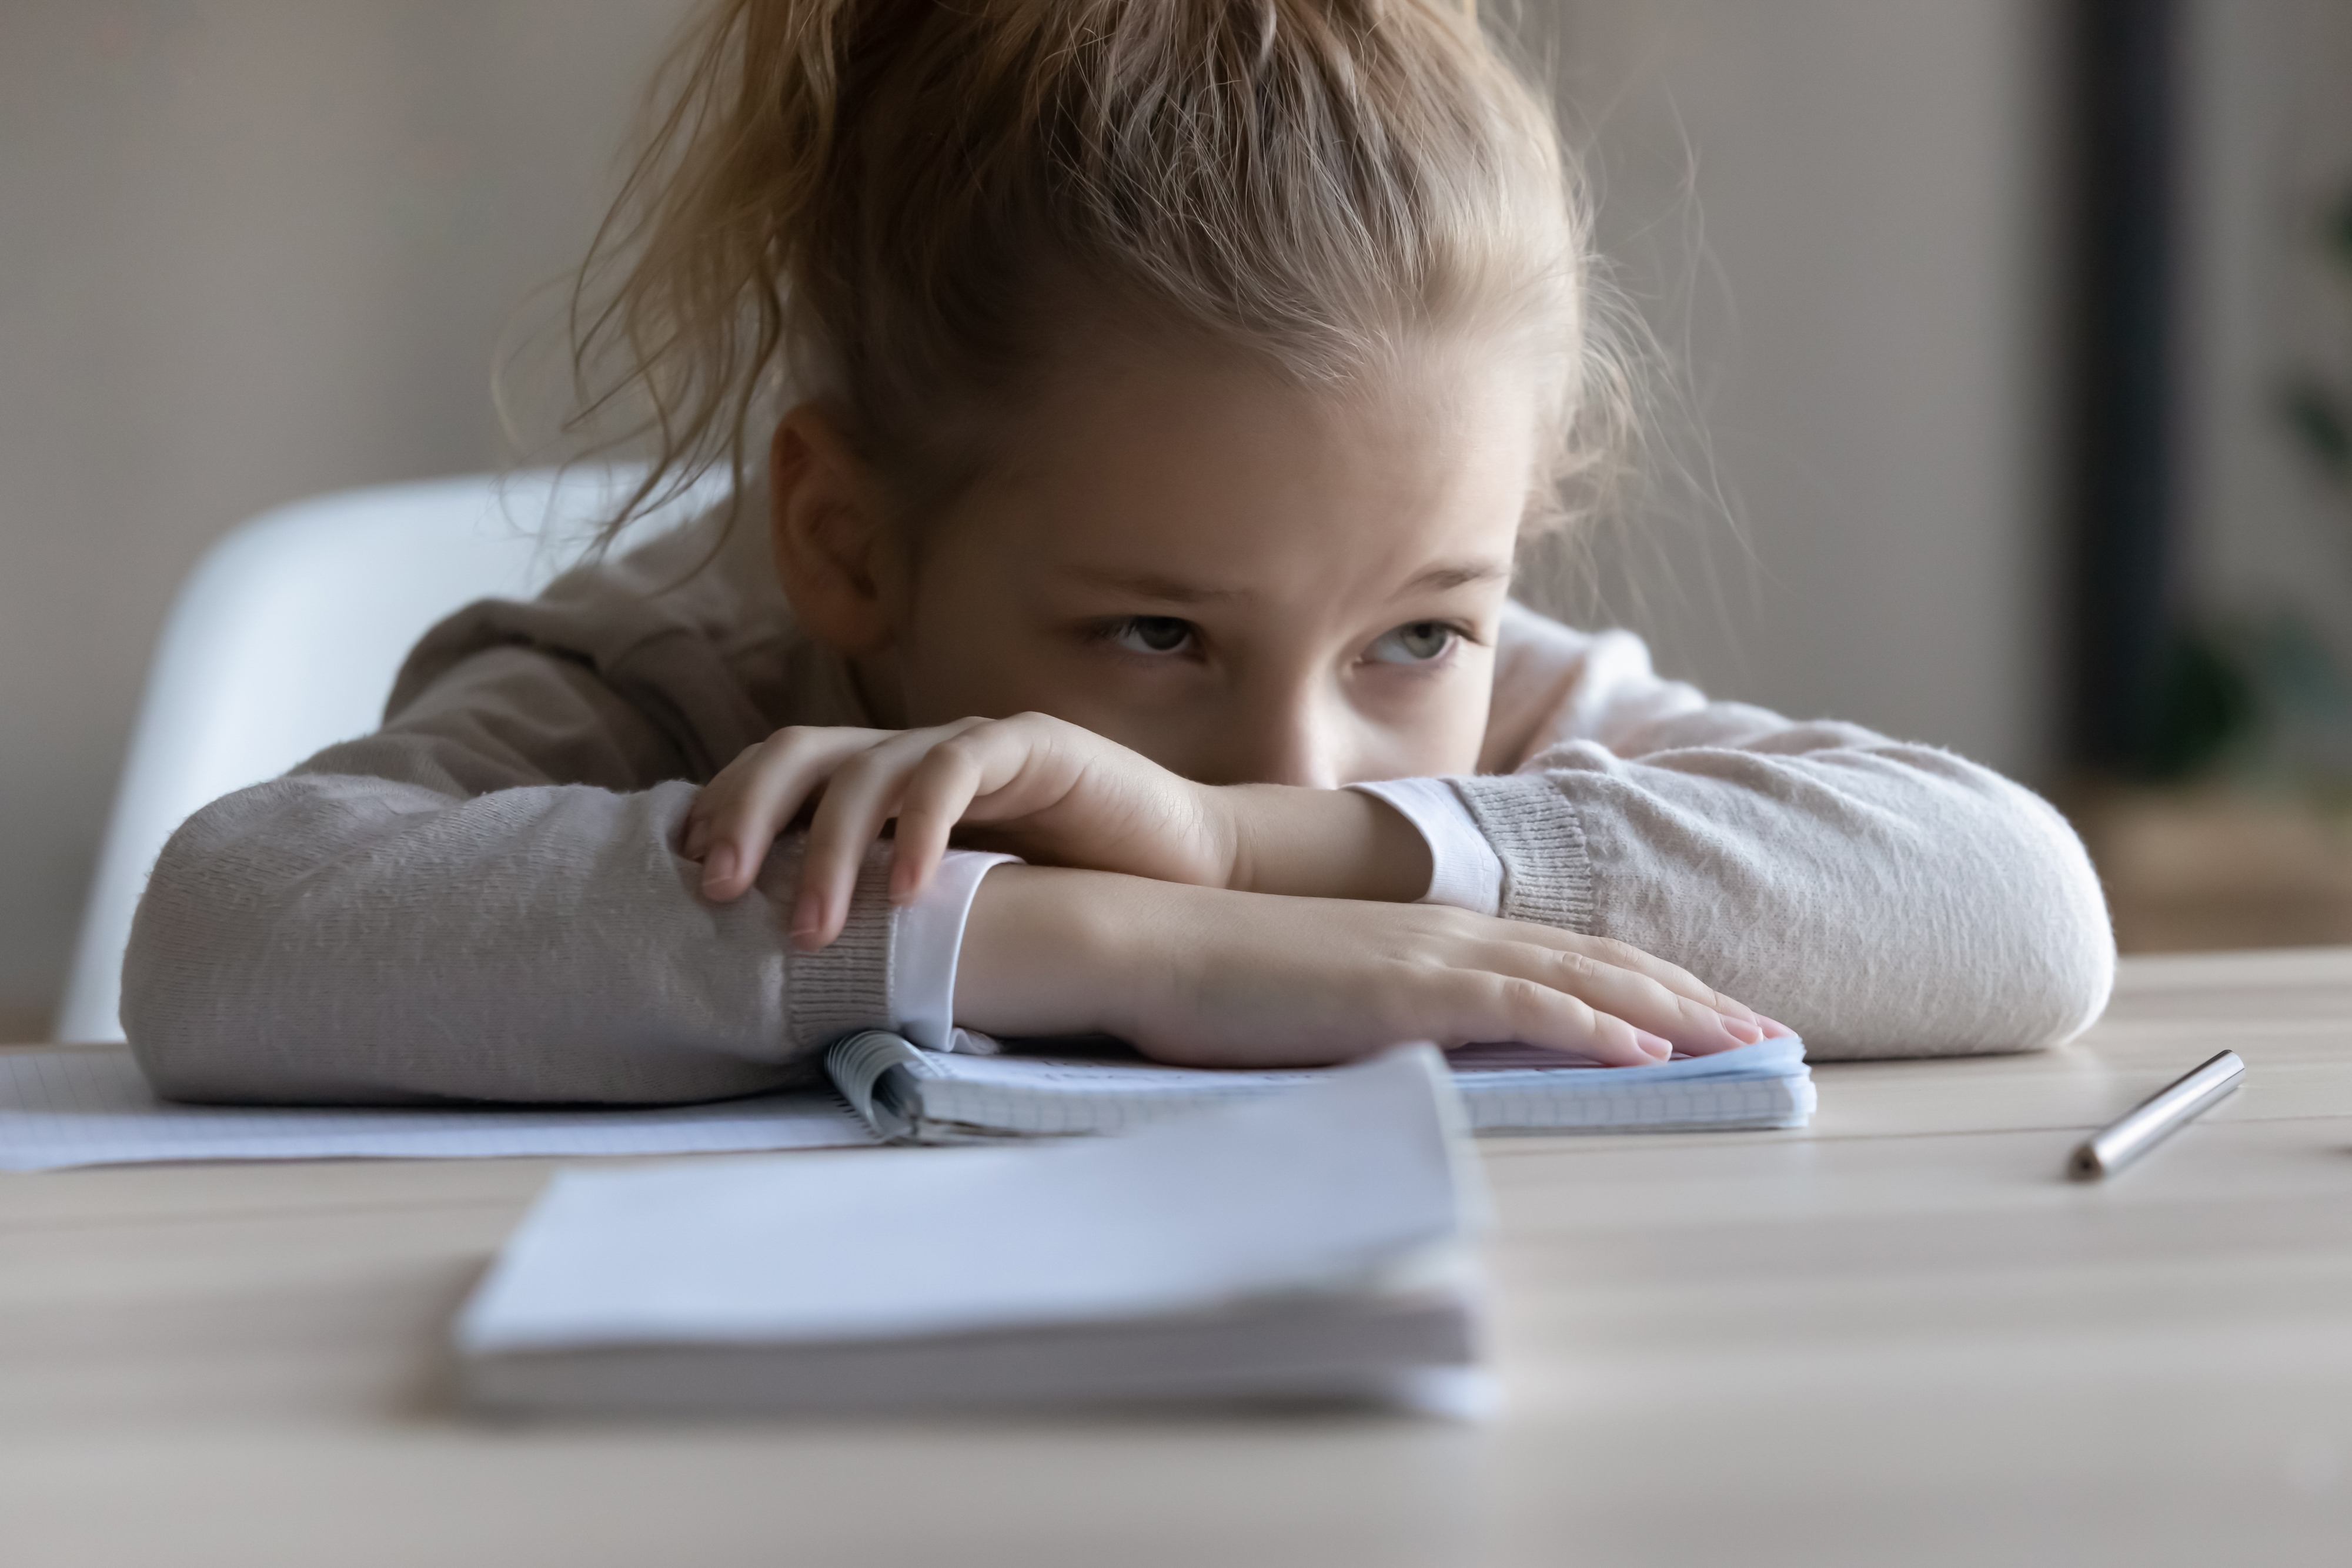 A sad little girl puts her head down on the desk, distracted from work | Source: Shutterstock